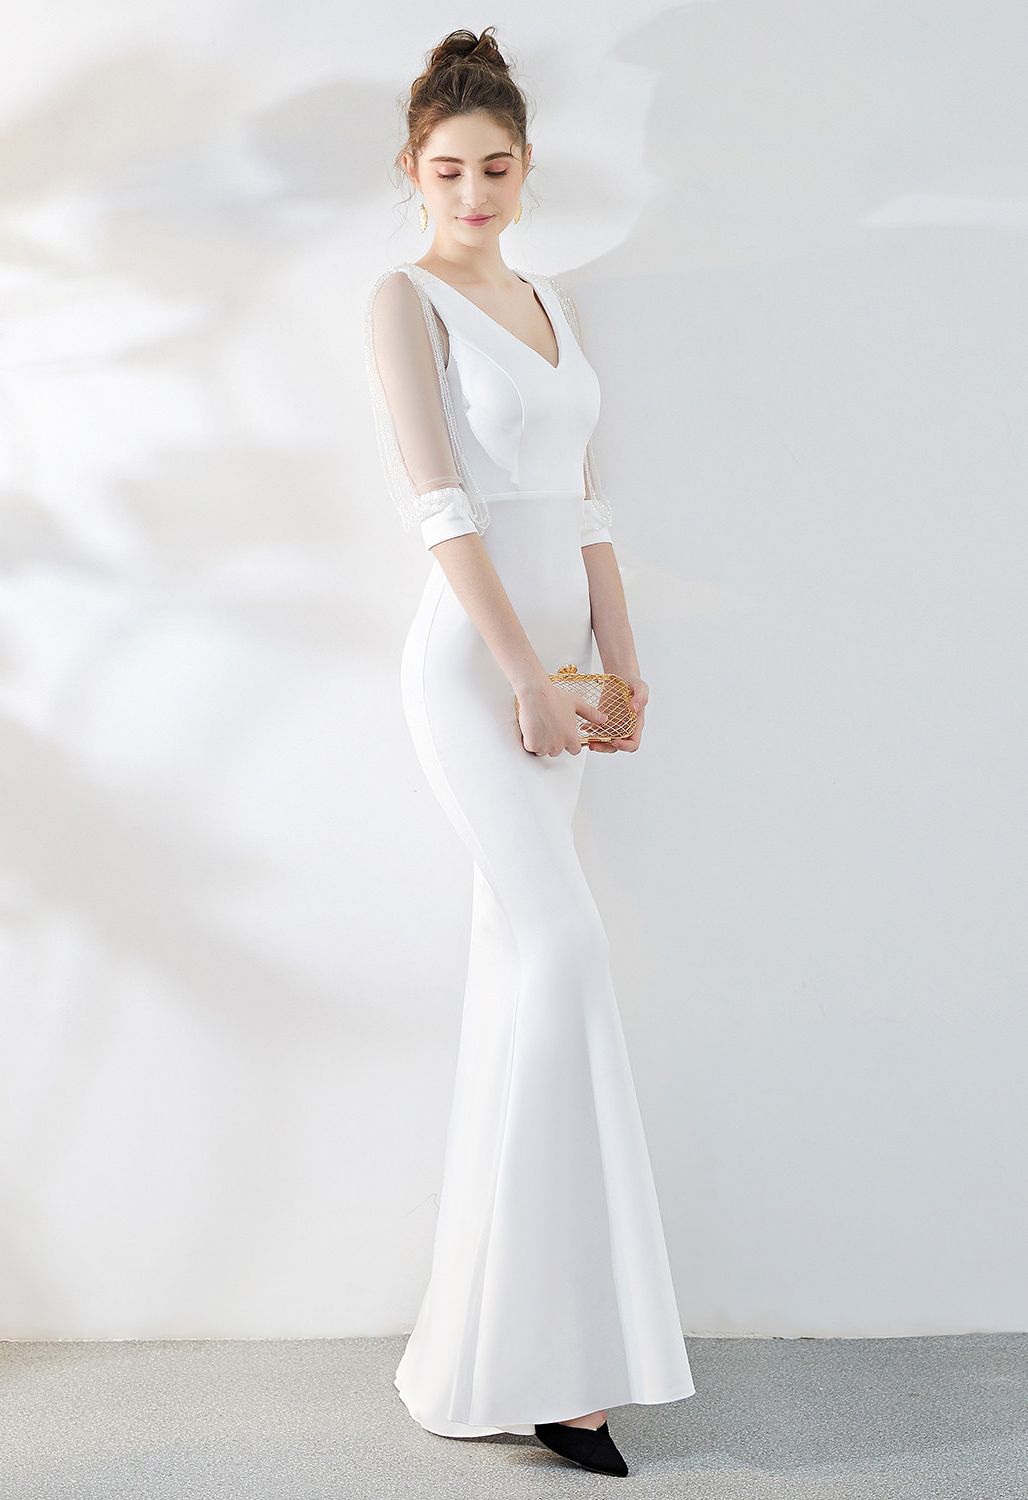 Draped Bead Mesh Sleeve Gown in White